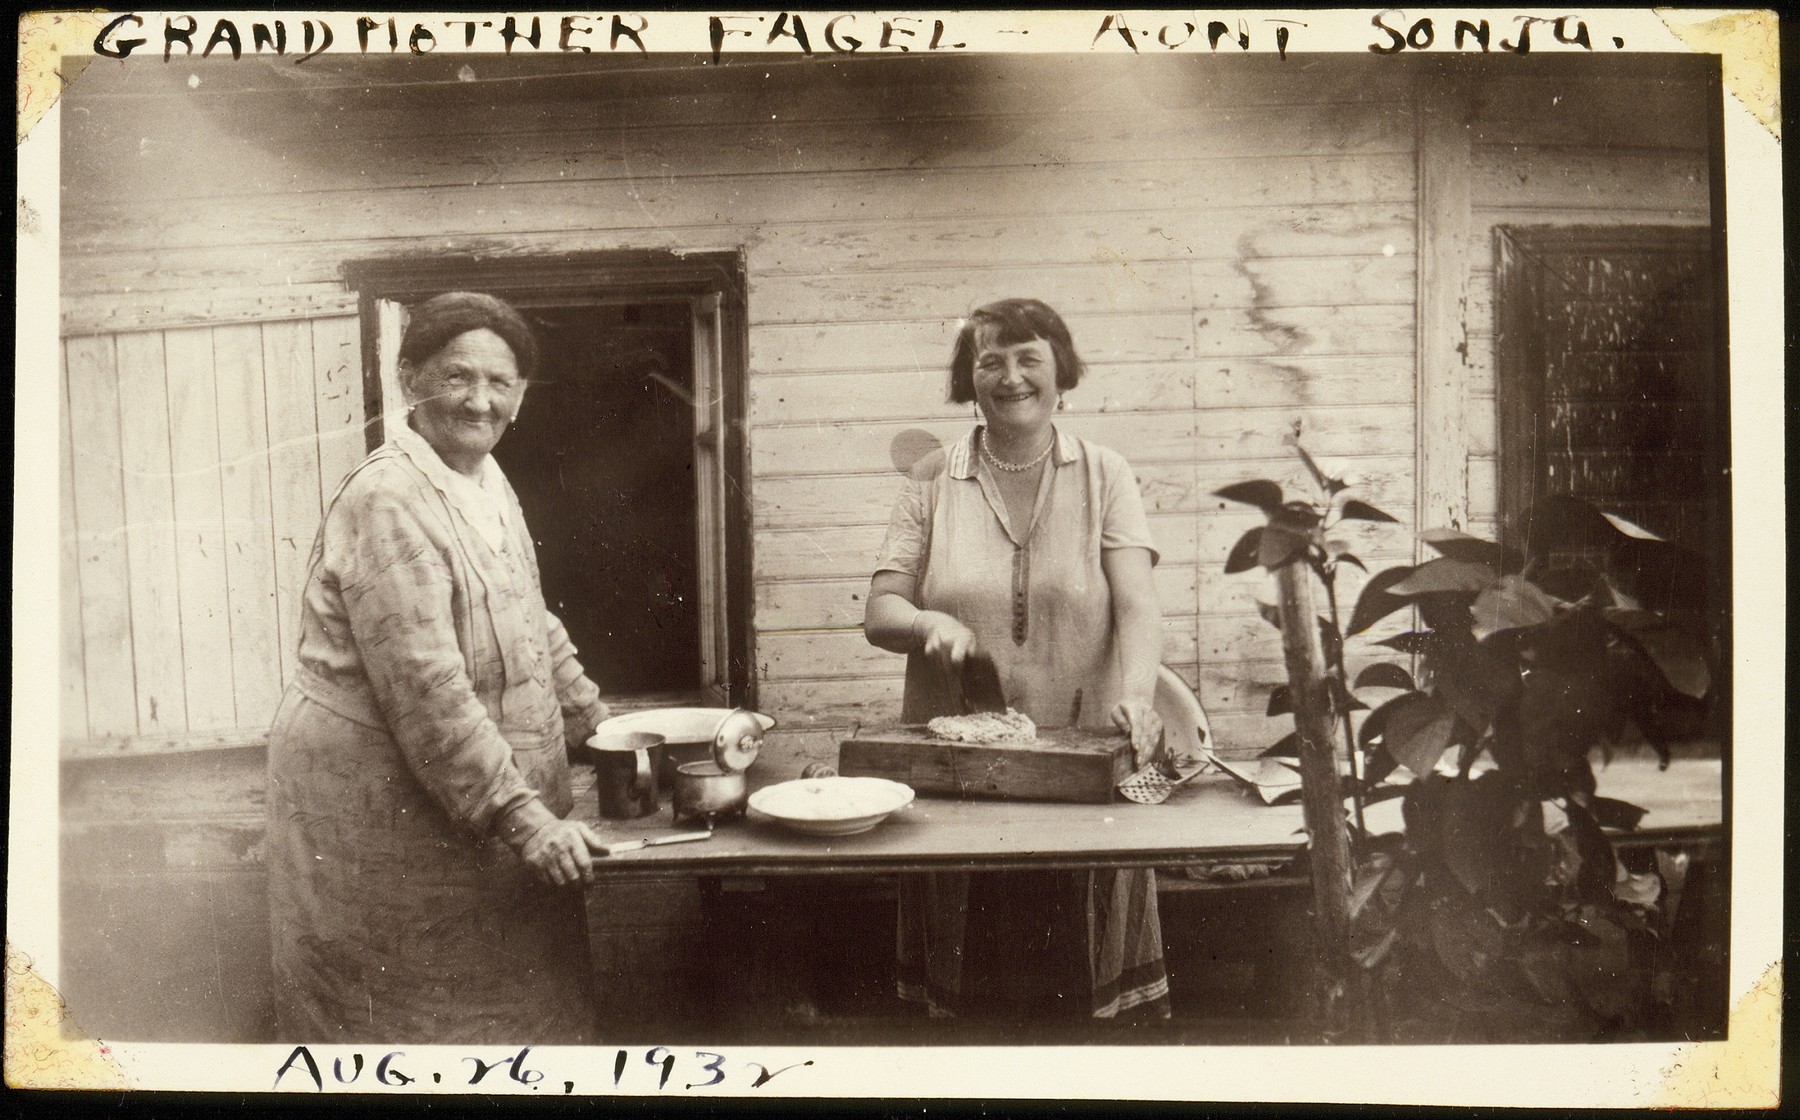 Feige Virshubski prepares a meal with her daughter, Sonia Saposnikow.